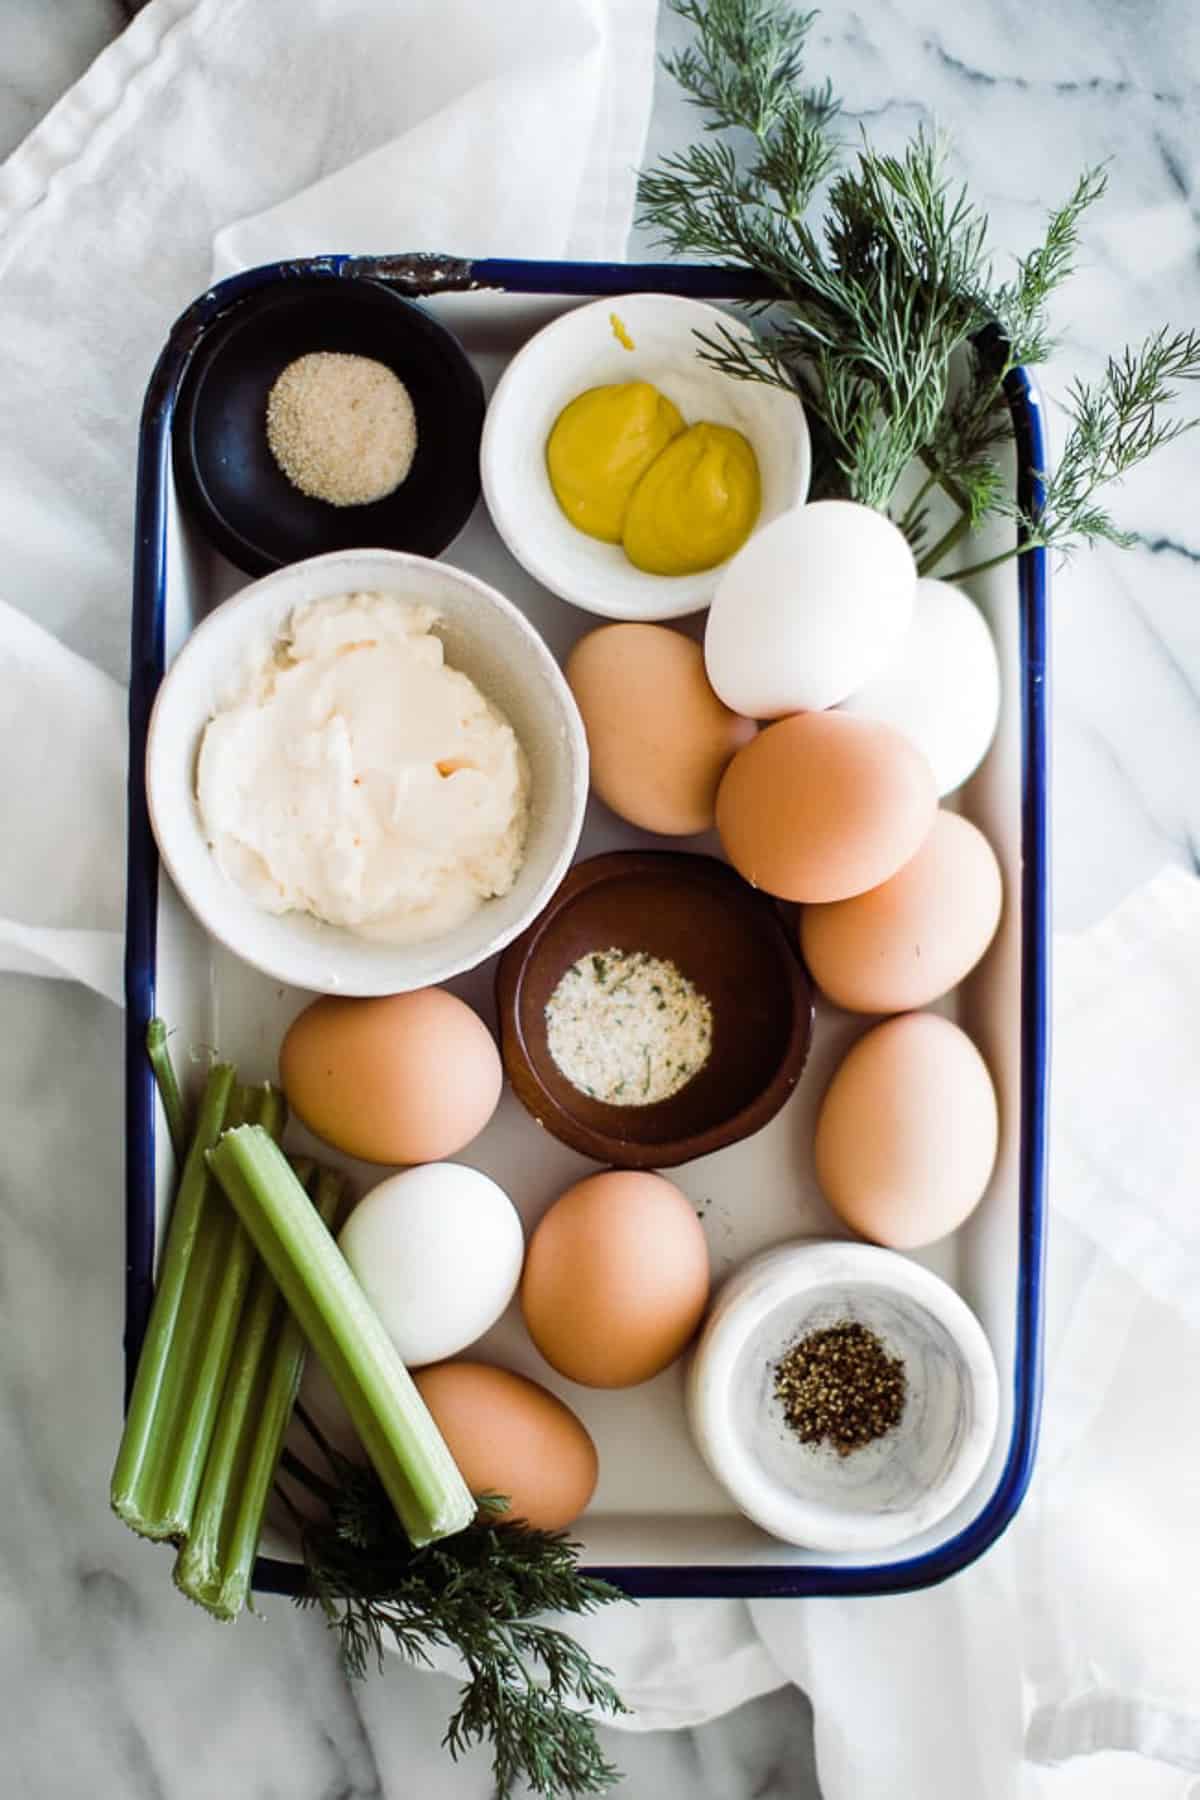 ingredients to egg salad sandwich on a tray
